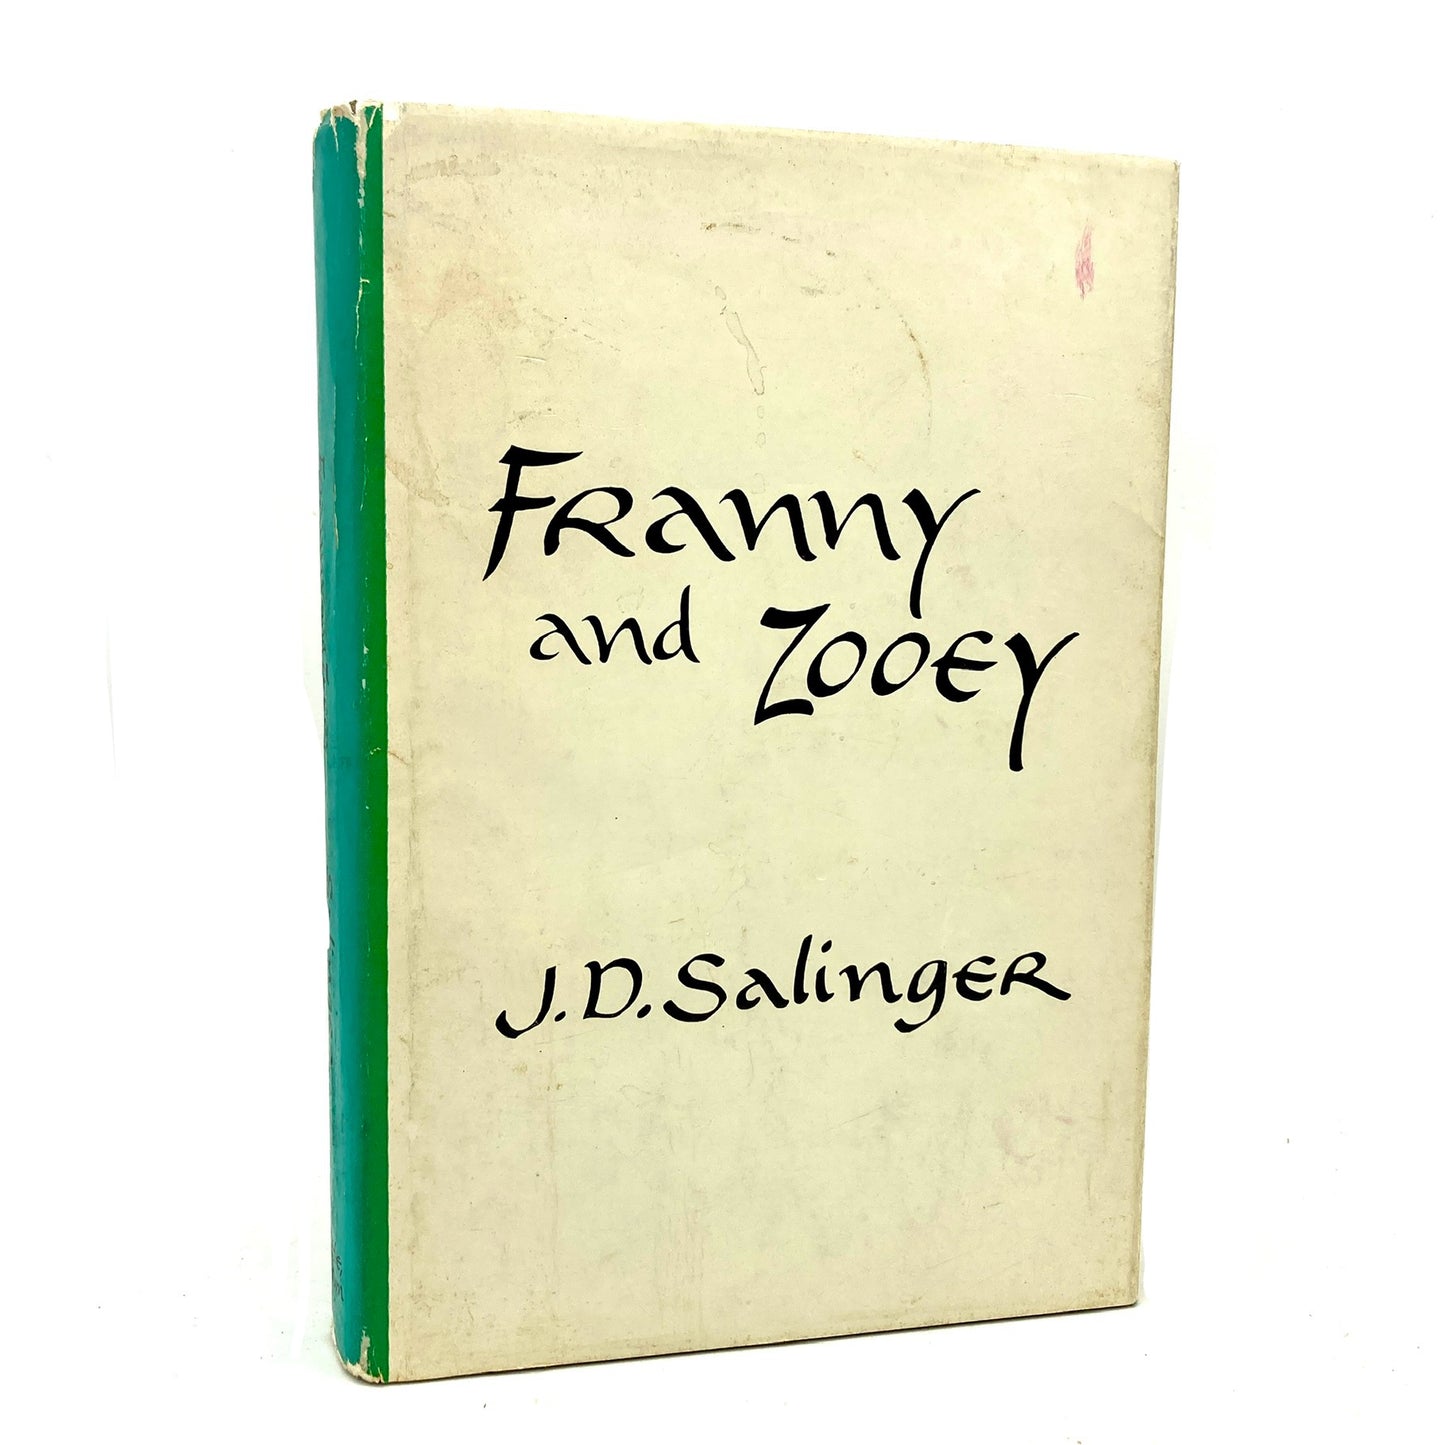 SALINGER, J.D. "Franny and Zooey" [Little, Brown & Co, 1961] 1st Edition/1st - Buzz Bookstore